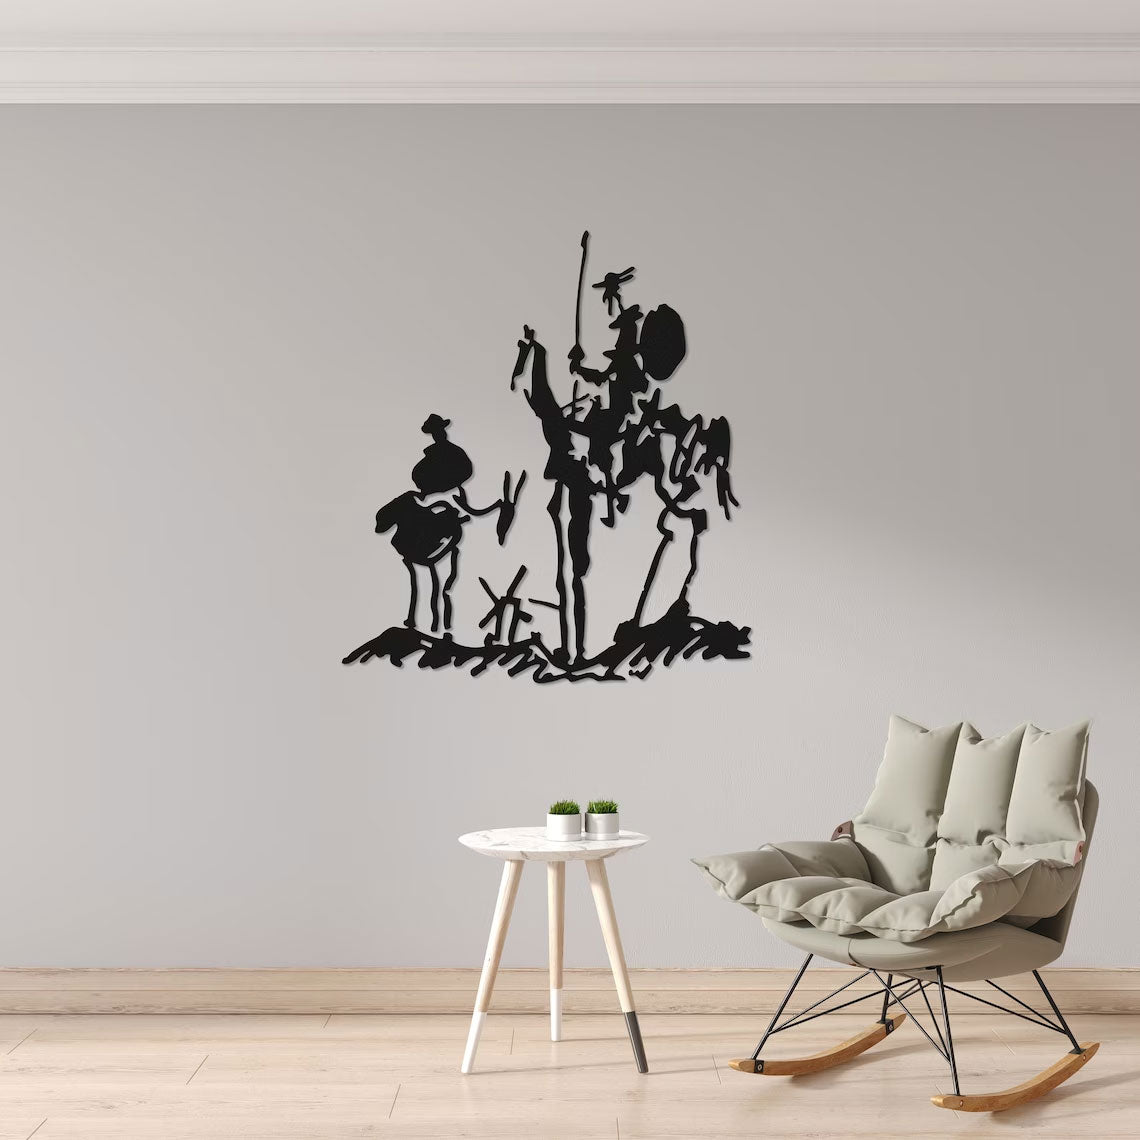 Picasso Don Quijote